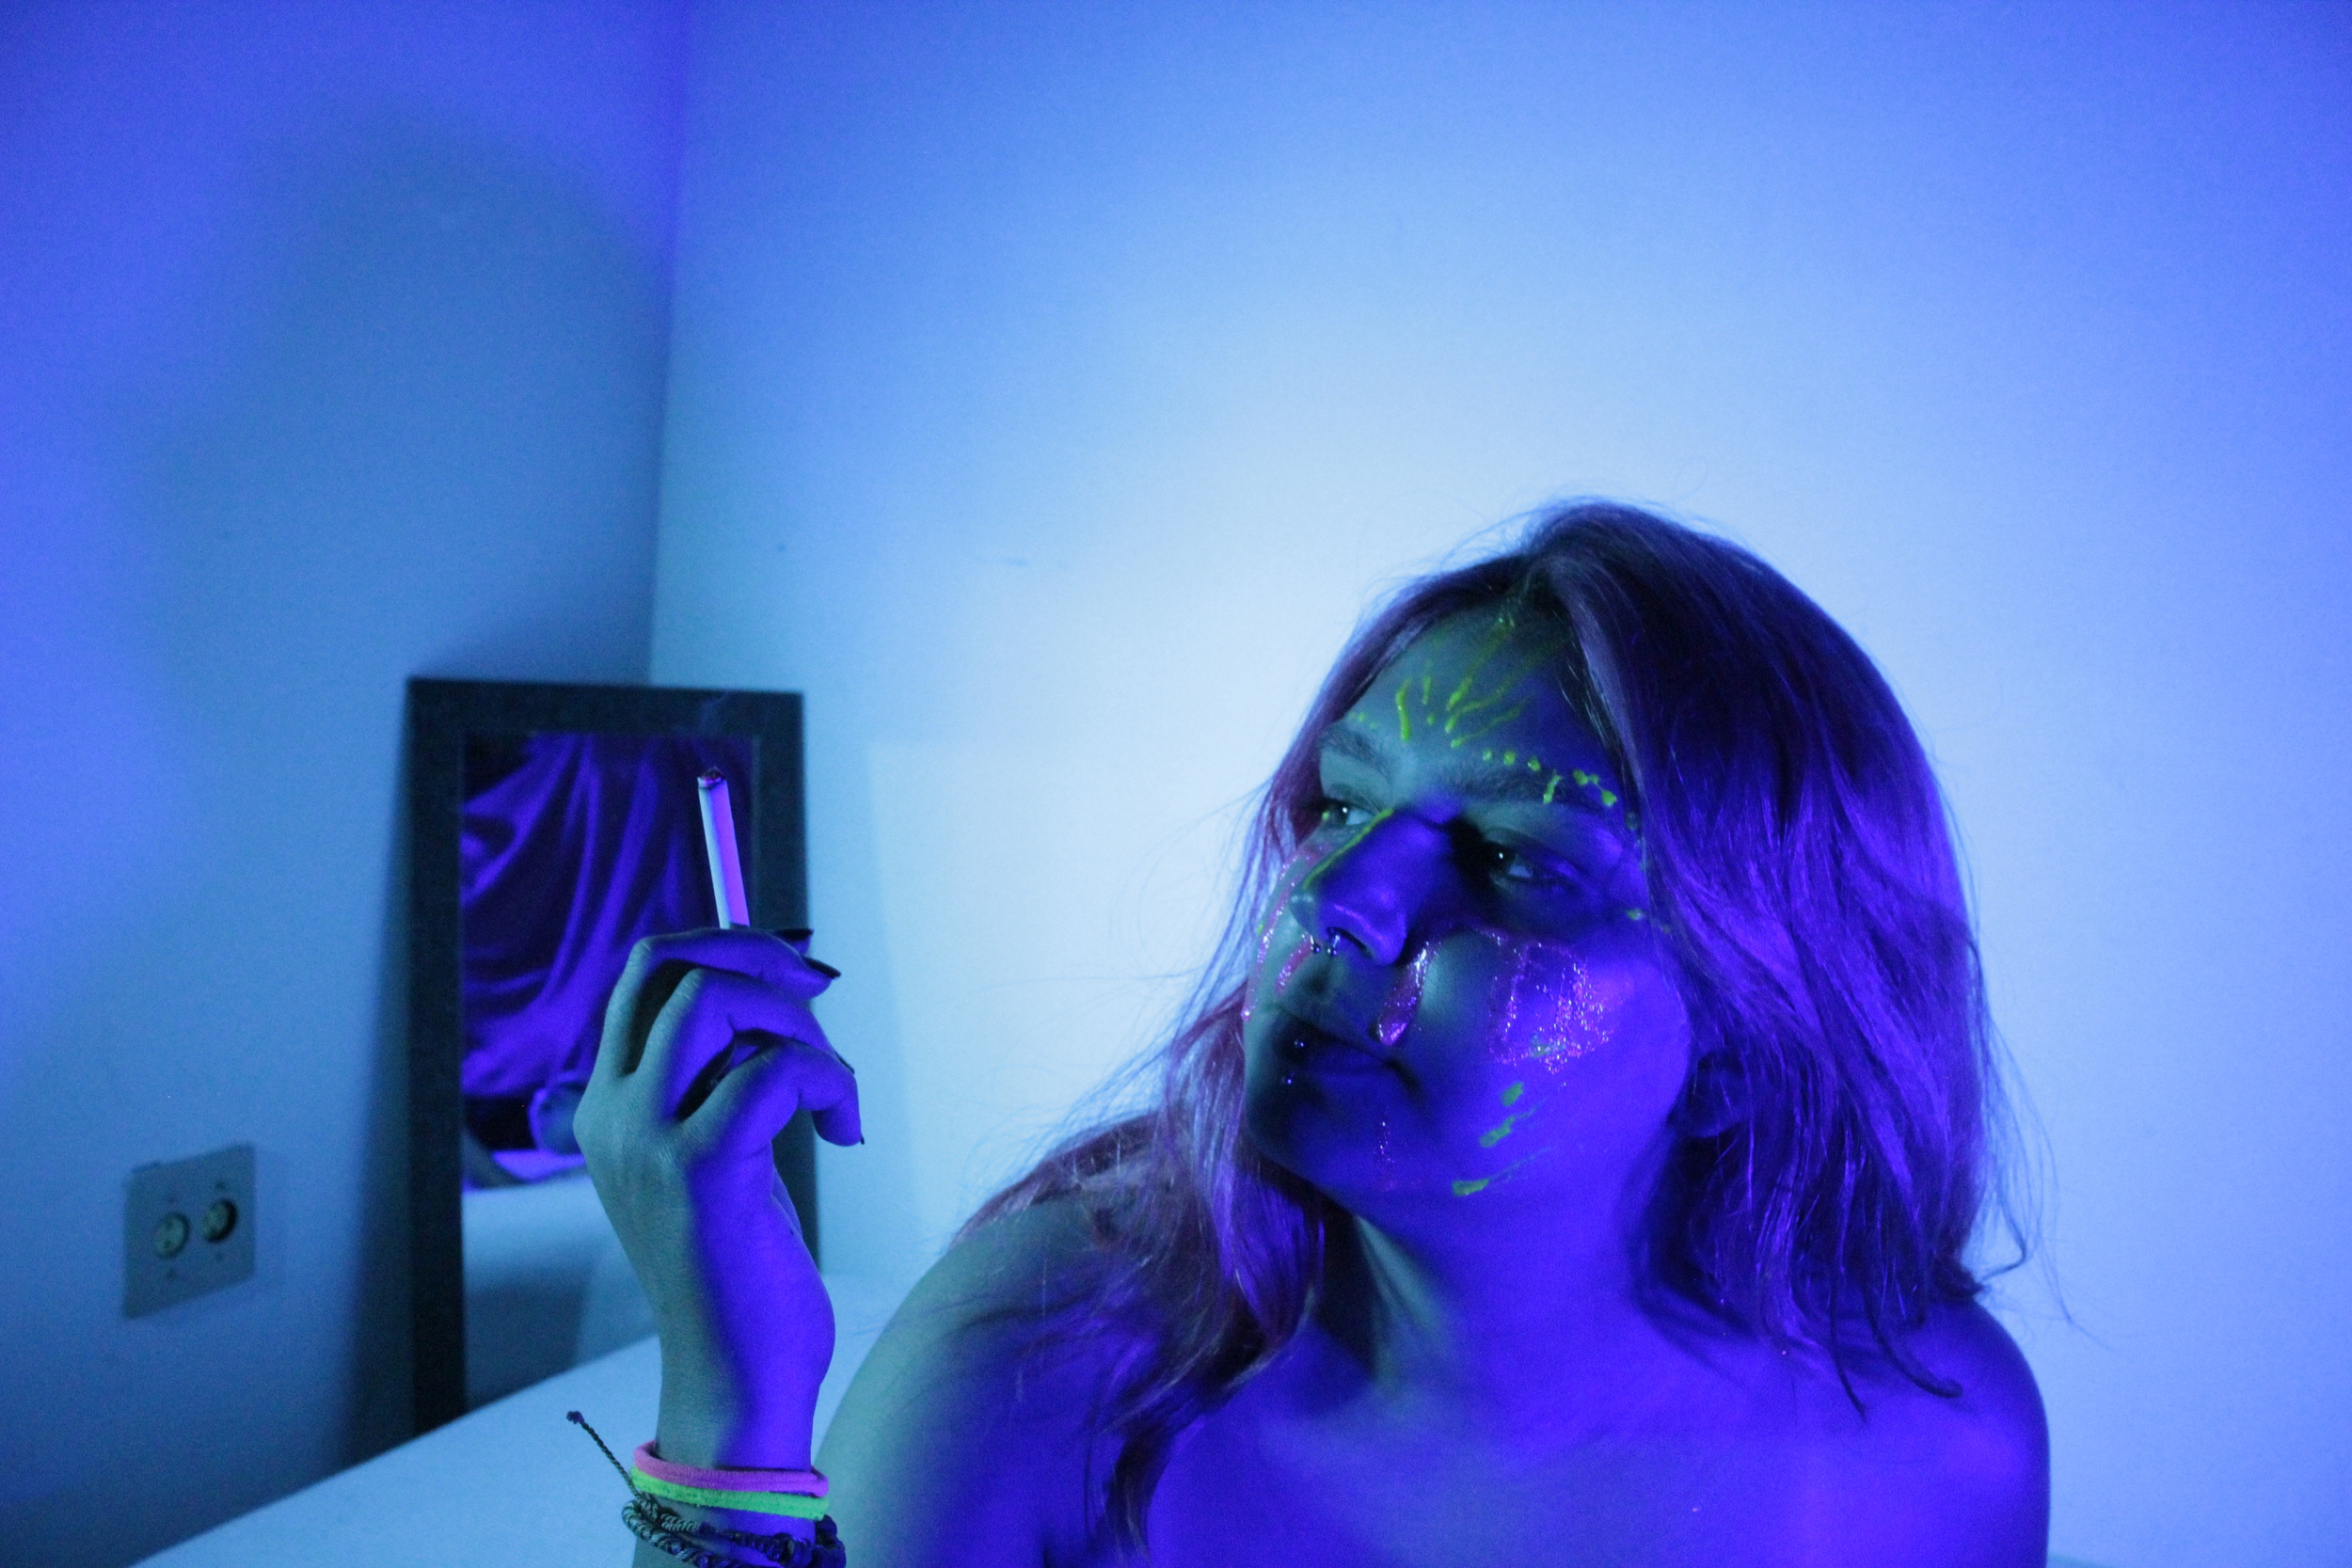 Neon photoshoot in bed with Lia Privas